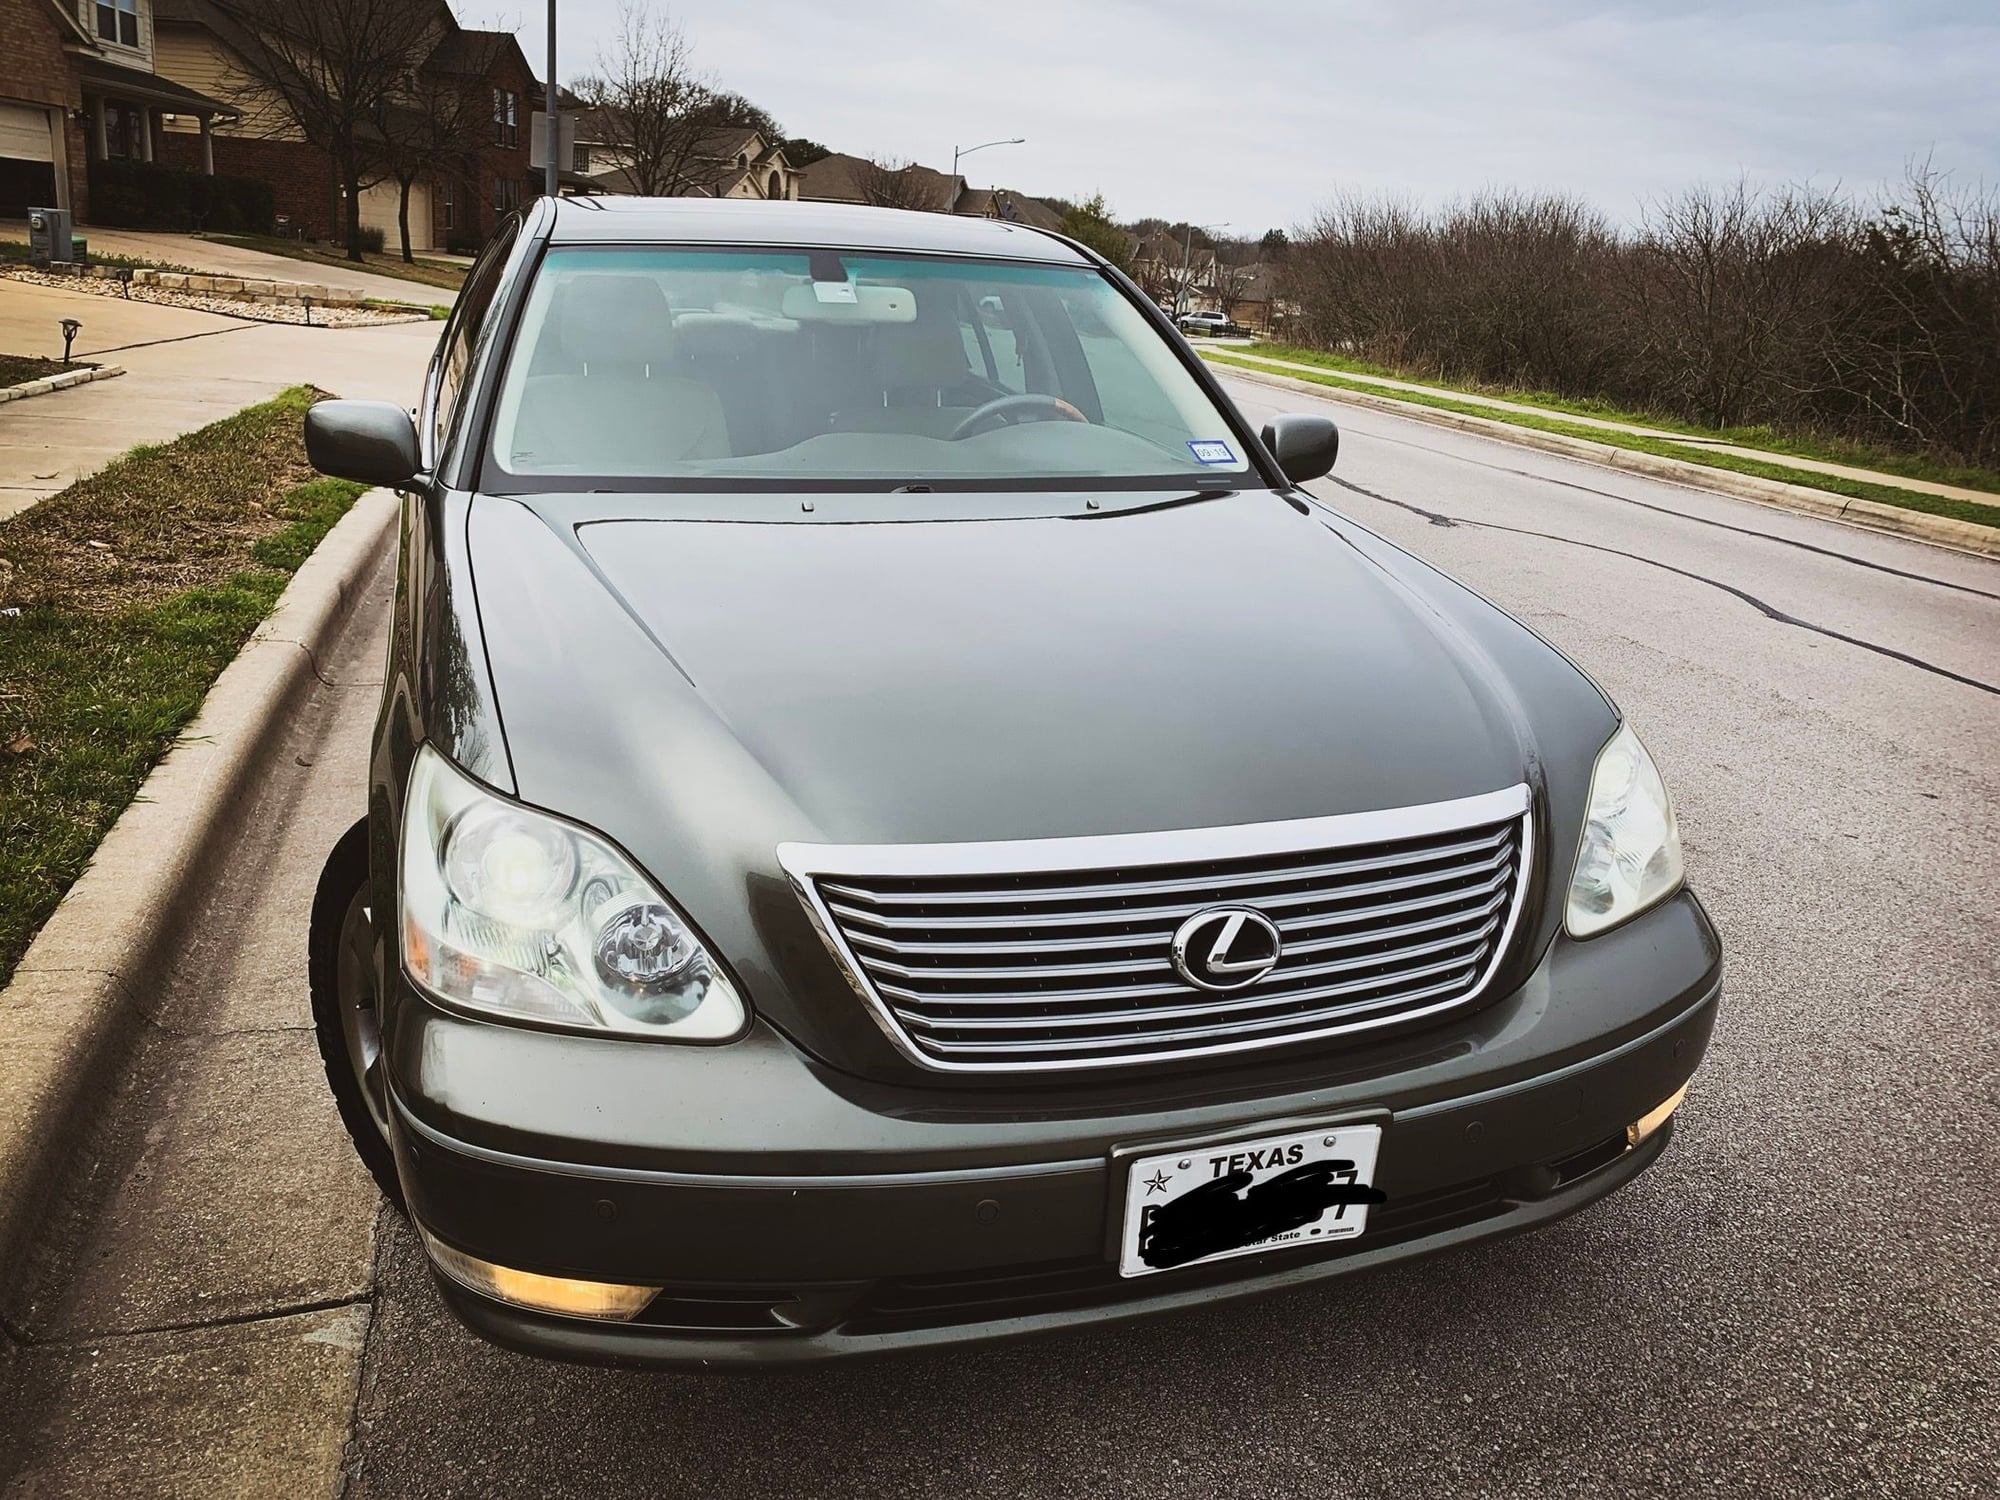 2004 Lexus LS430 - 2004 Lexus LS 430 - 131k miles - Excellent Codnition - Used - VIN JTHBN36F440156649 - 8 cyl - 2WD - Automatic - Sedan - Other - Austin, TX 78748, United States